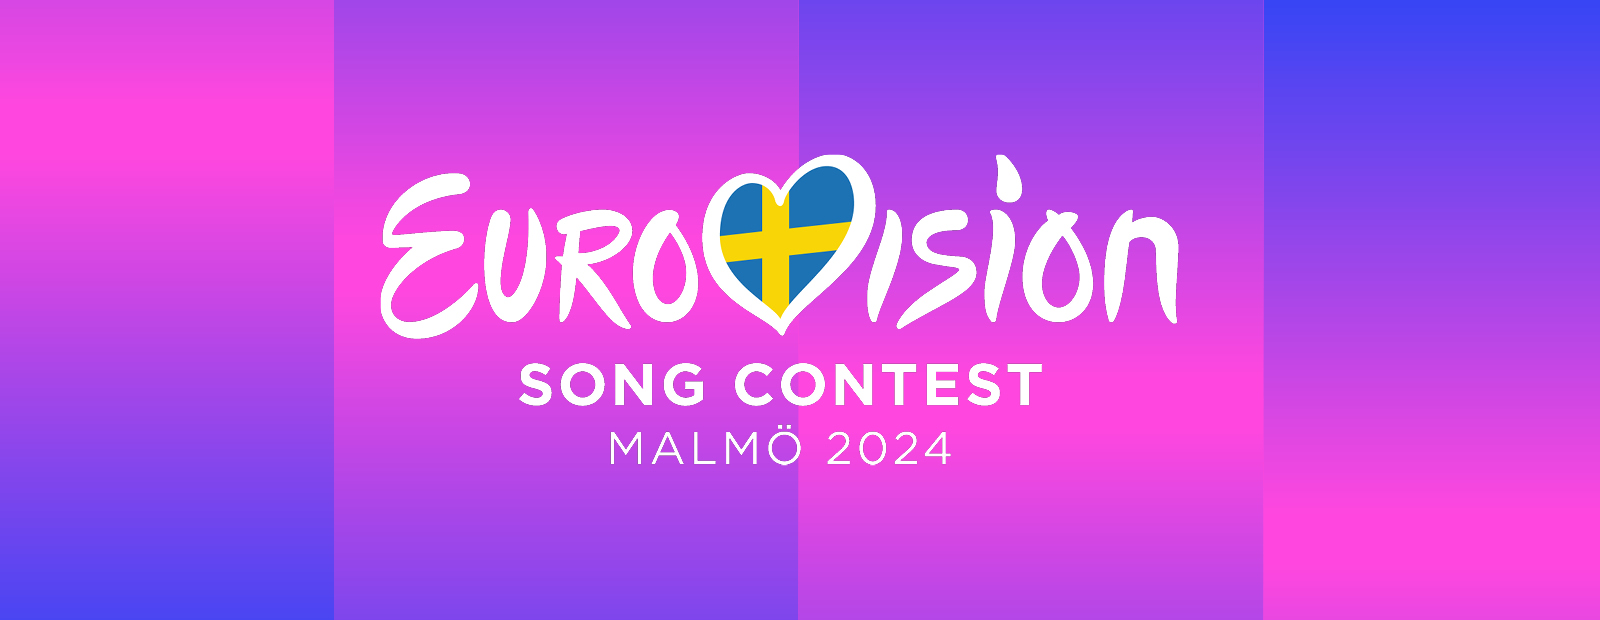 Eurovision Song Contest 2024 Semifinal 1 - Live Show